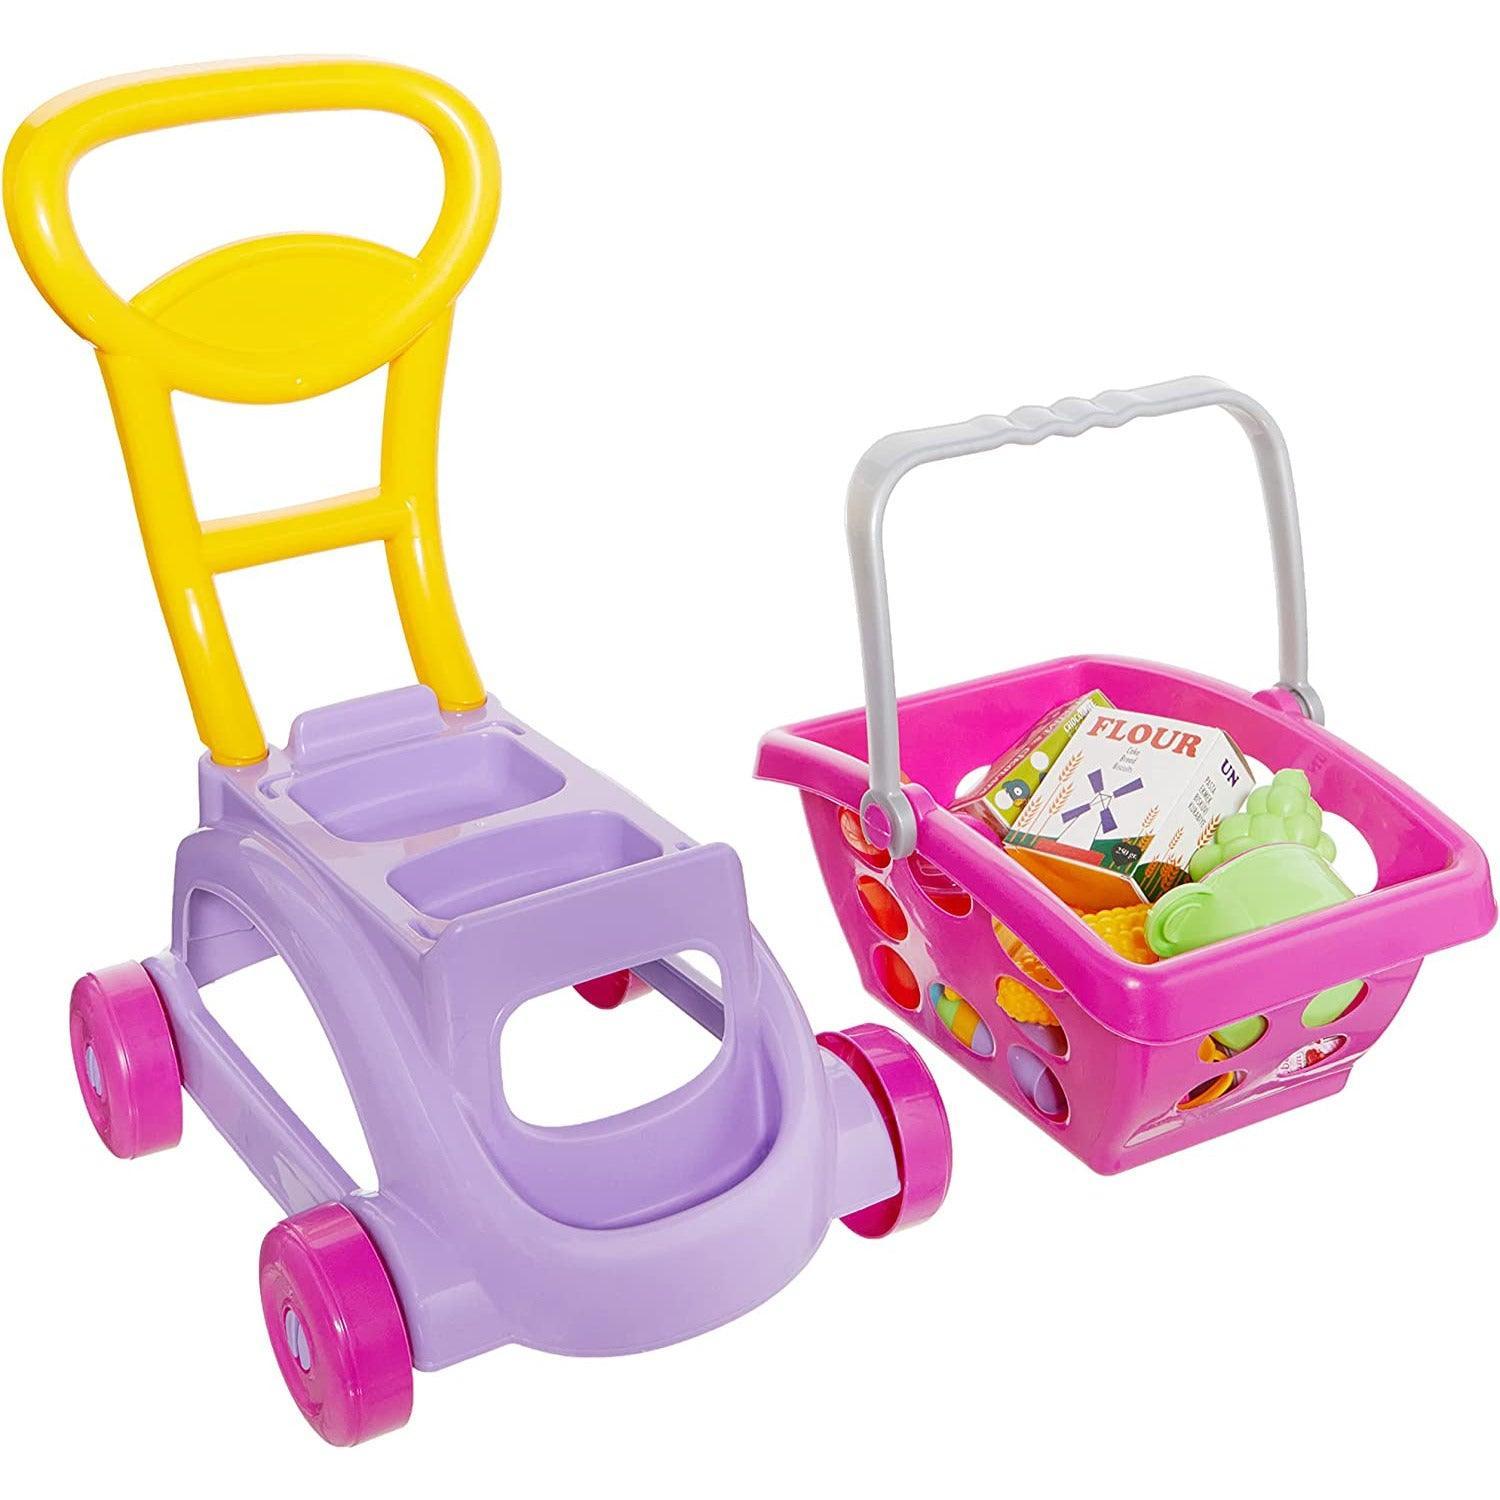 Dede 1972 Barbie Market Trolley With Basket - BumbleToys - 3+ years, Barbie, Cecil, Girls, Roleplay, Toy House